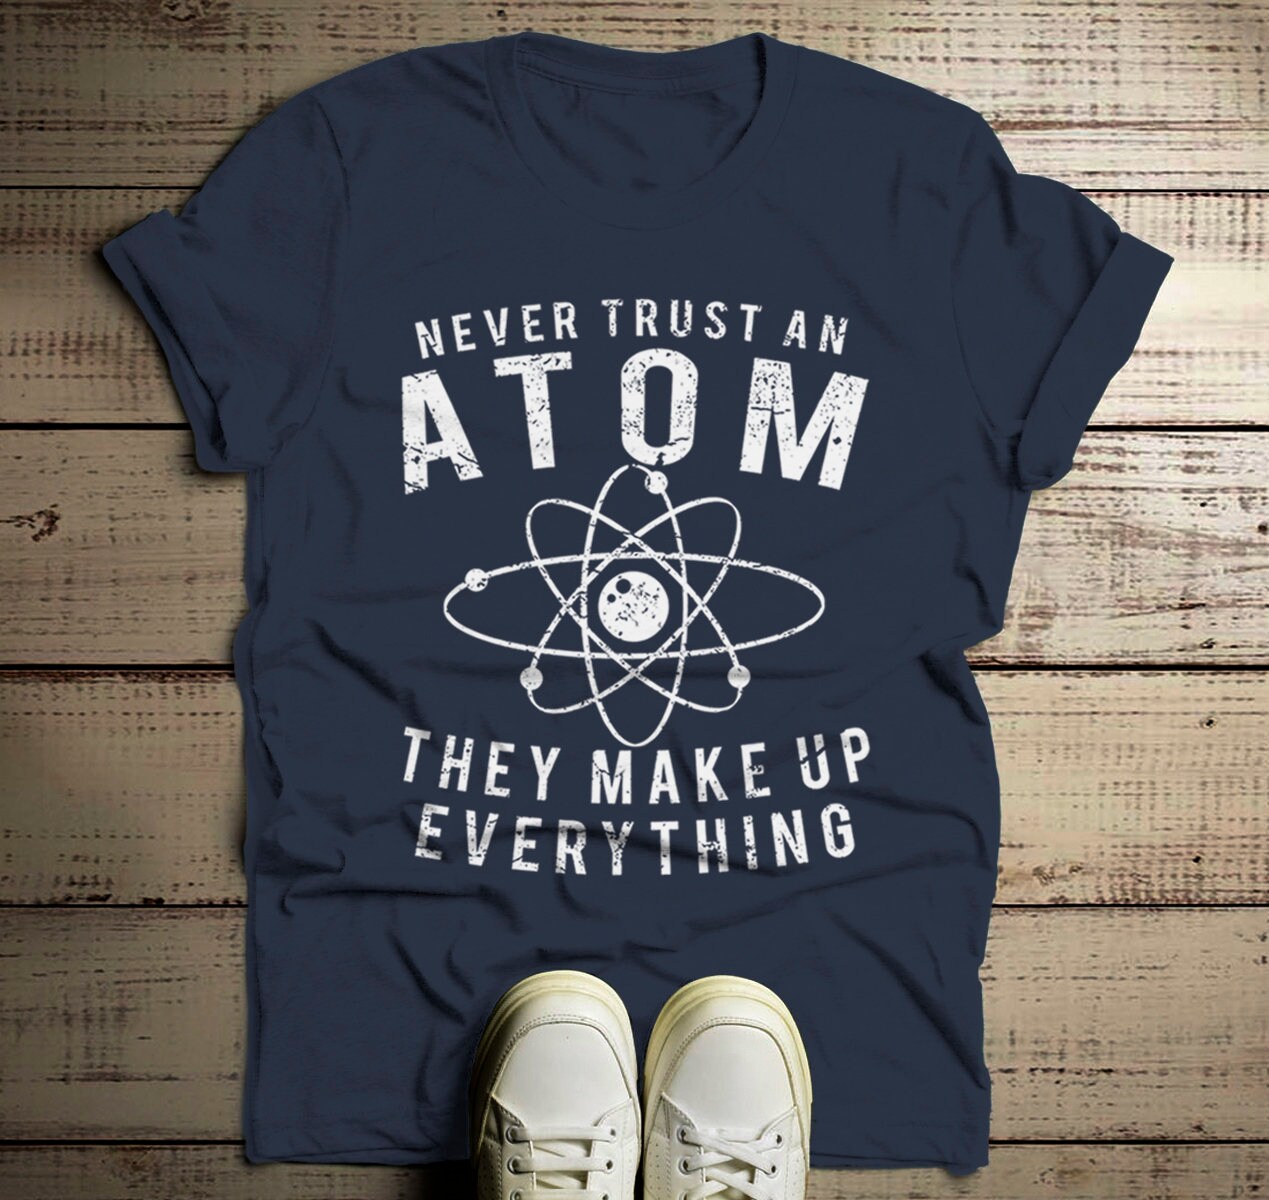 Men's Funny Science T Shirt Never Trust Atom Graphic Tee | Etsy